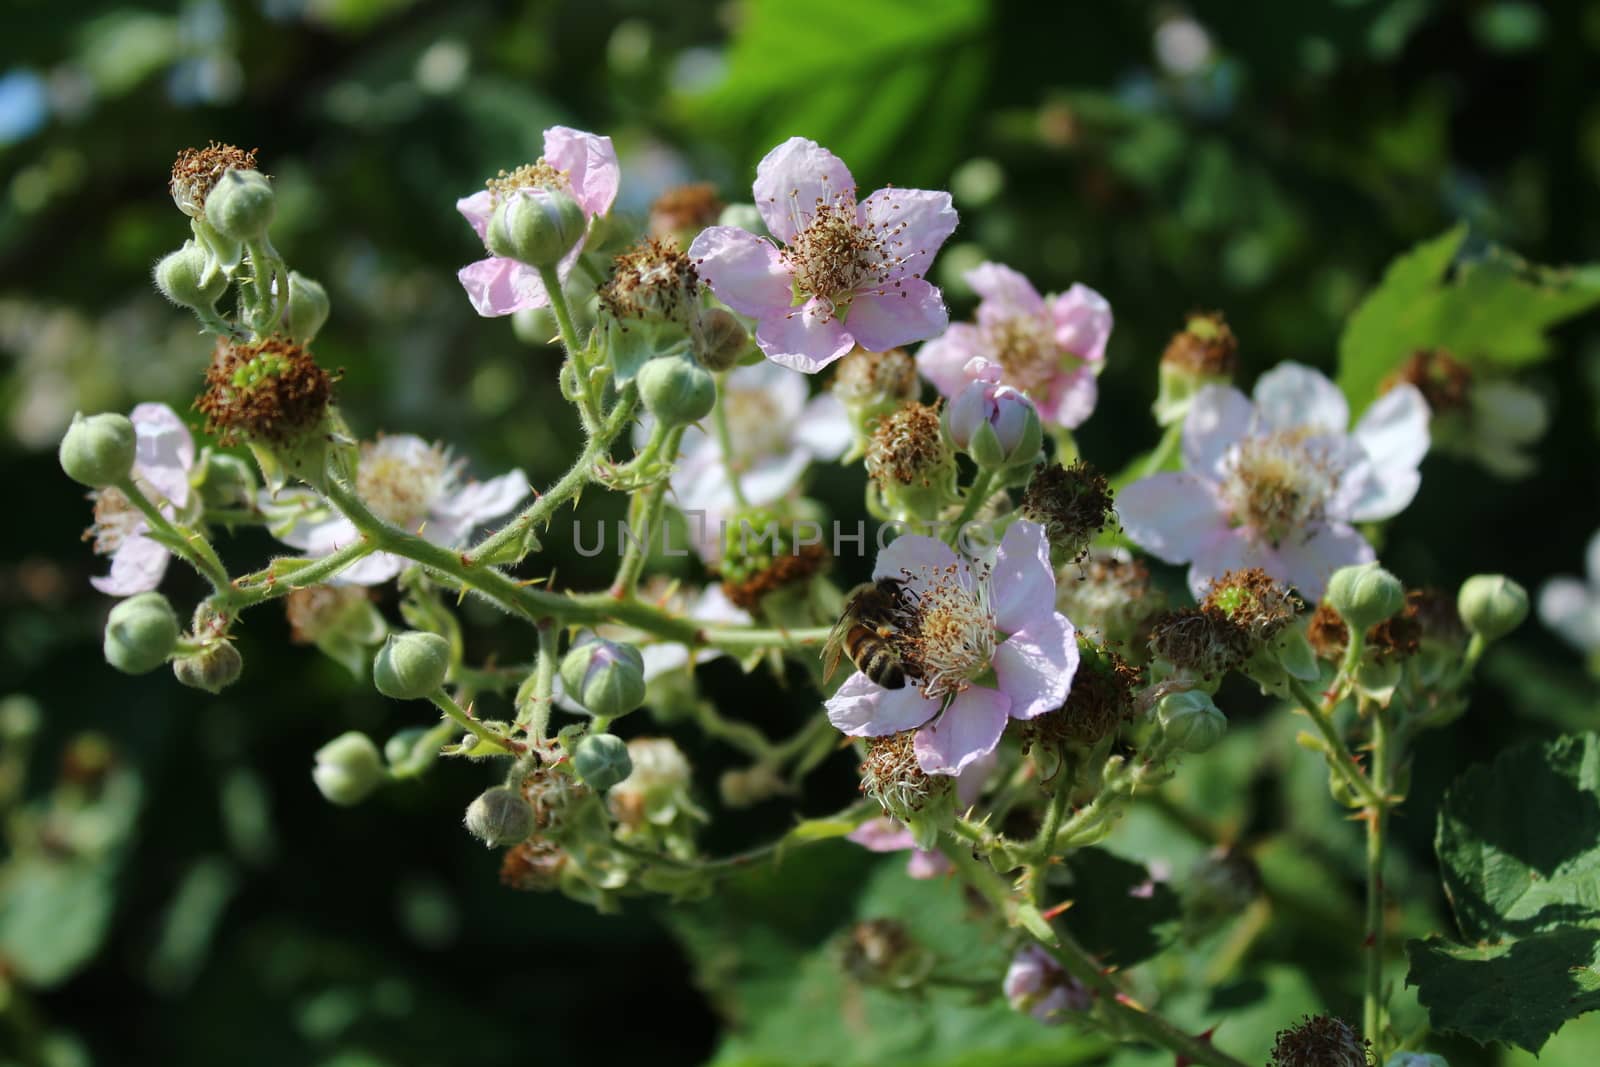 The picture shows a blackberry bush with many blossoms